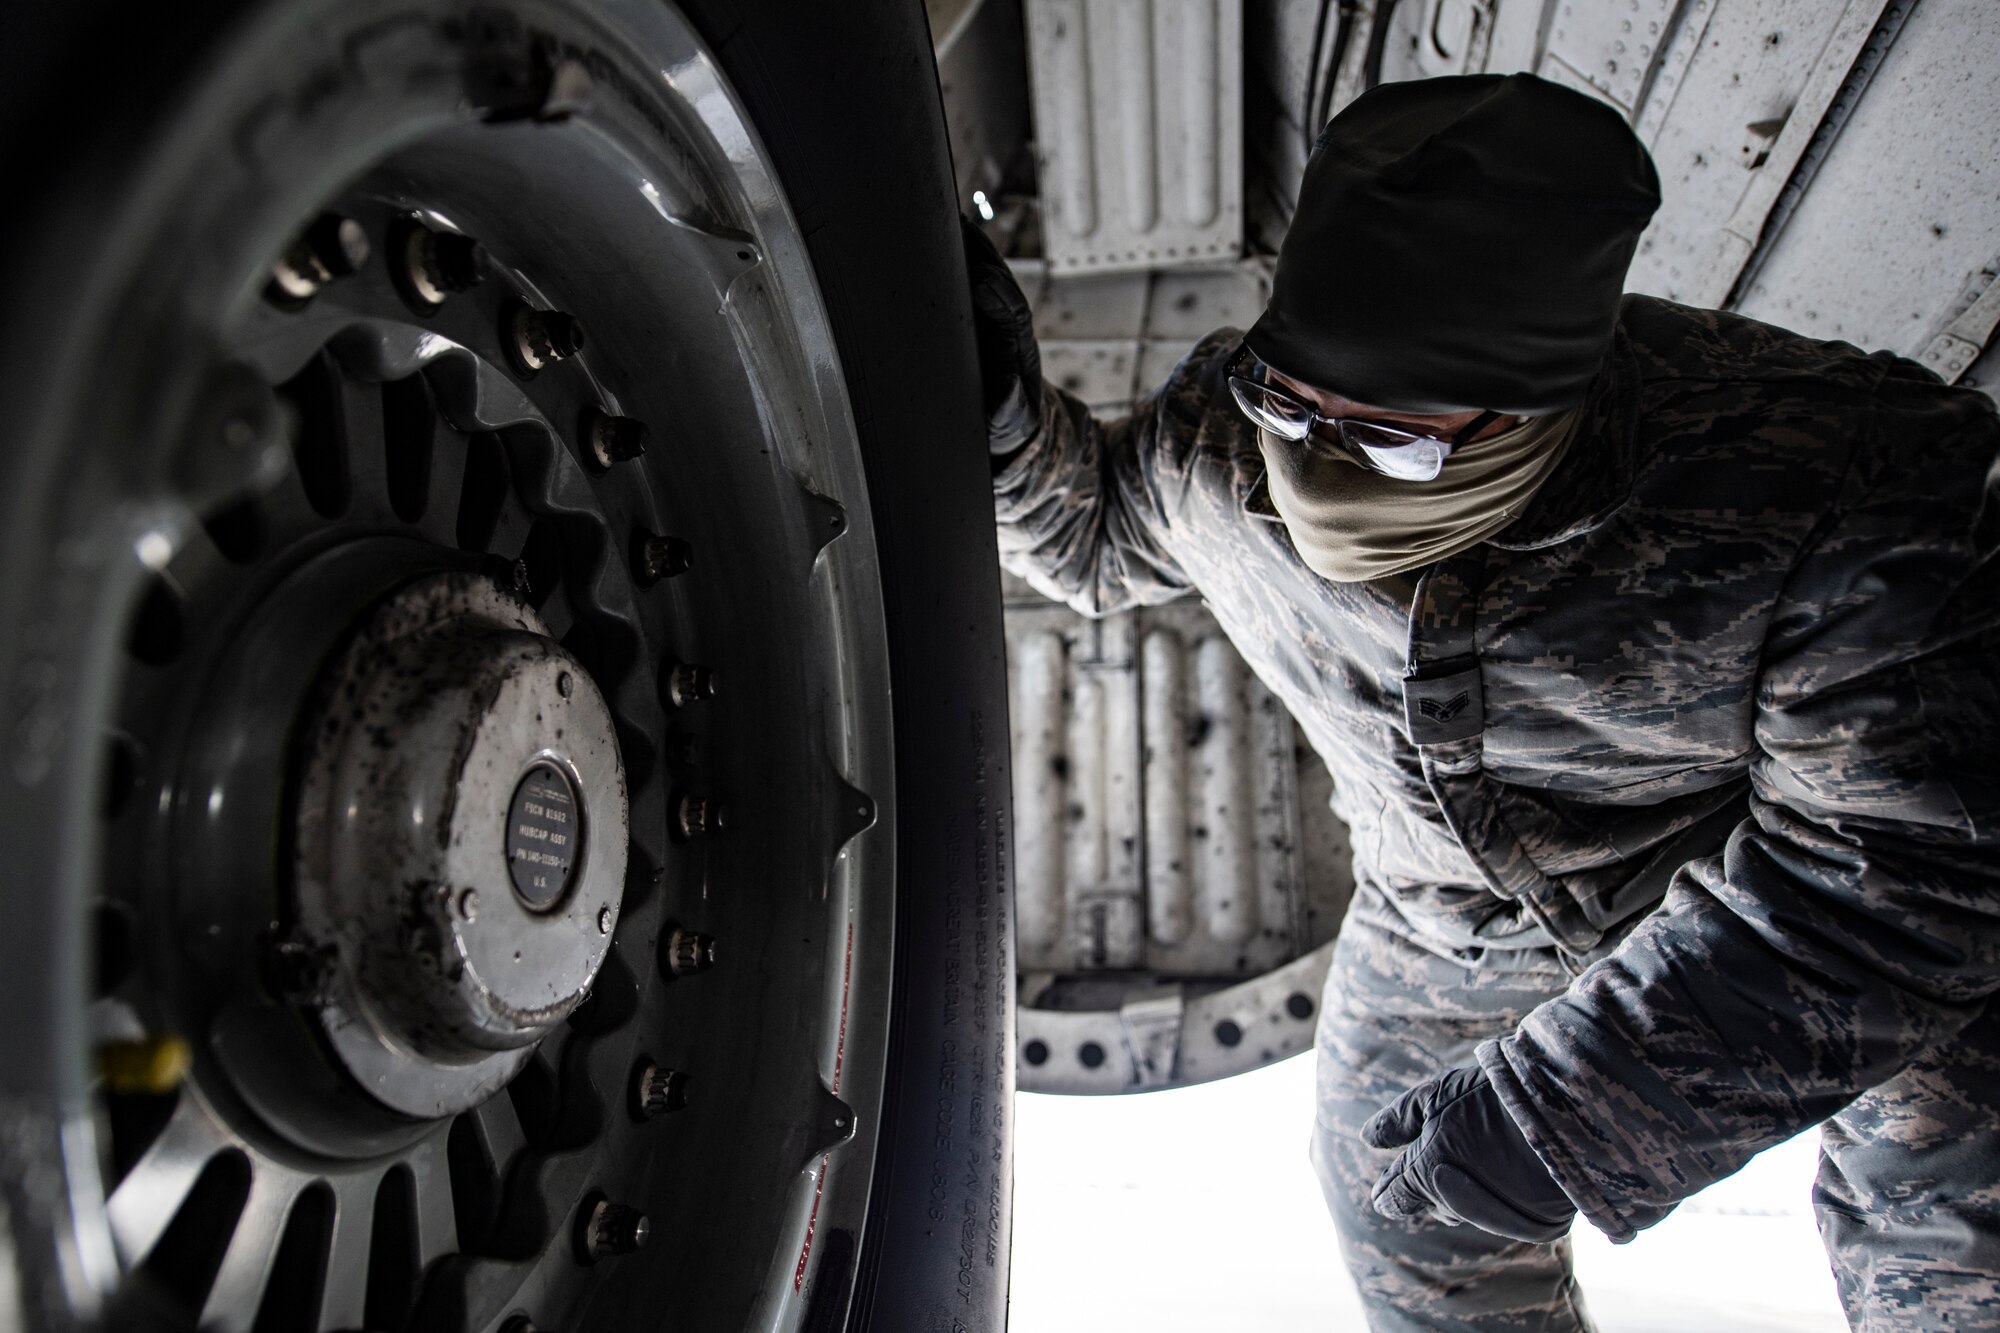 Crew chief inspects a wheel and tire assembly on a C-17 Globemaster III